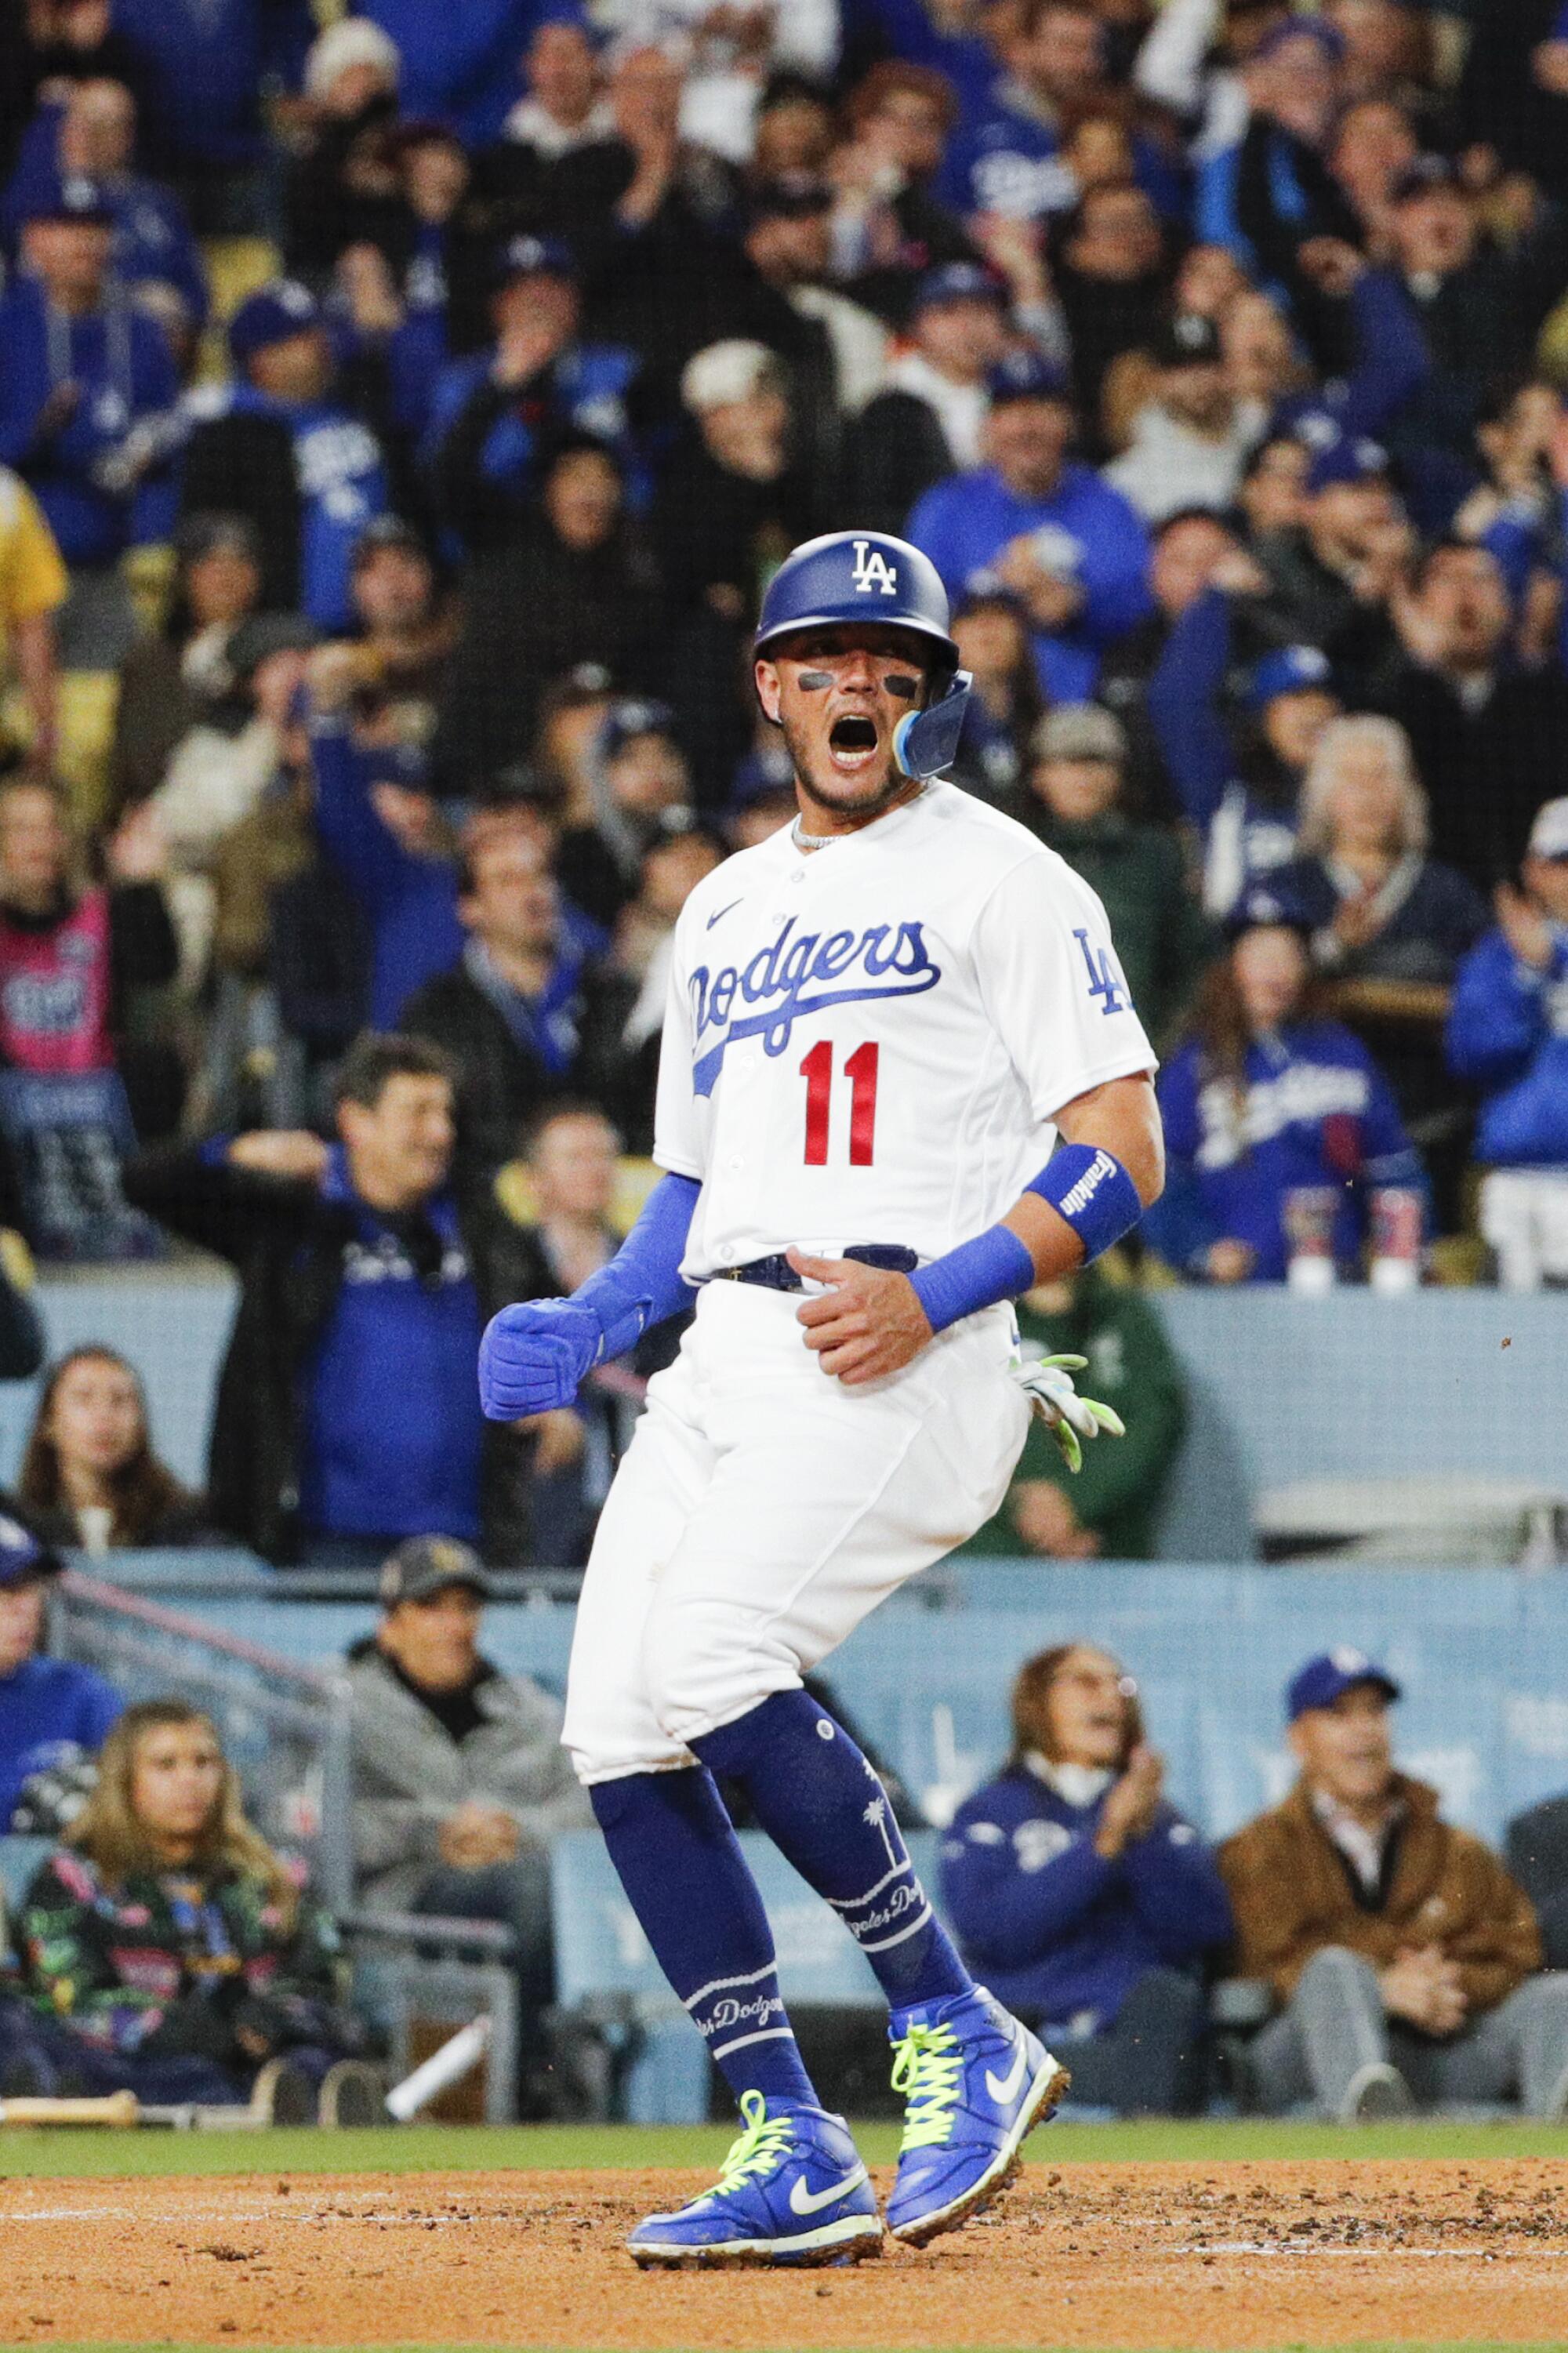 Miguel Rojas celebrates after scoring on a two-run double by Dodgers teammate Will Smith during the third inning.